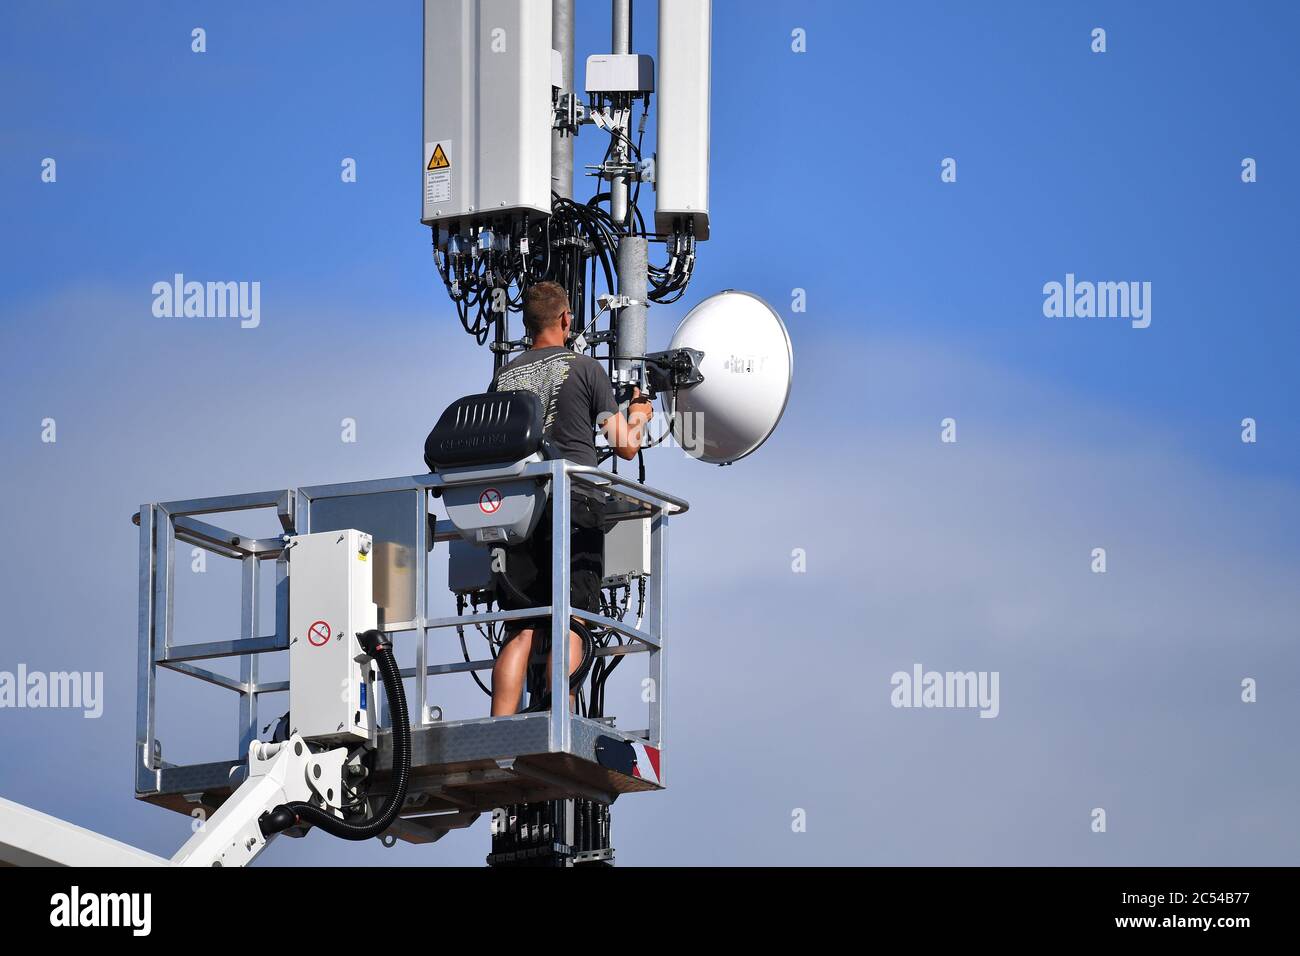 Hair, Deutschland. 30th June, 2020. Cell tower on a house roof. Worker  stands on a lifting